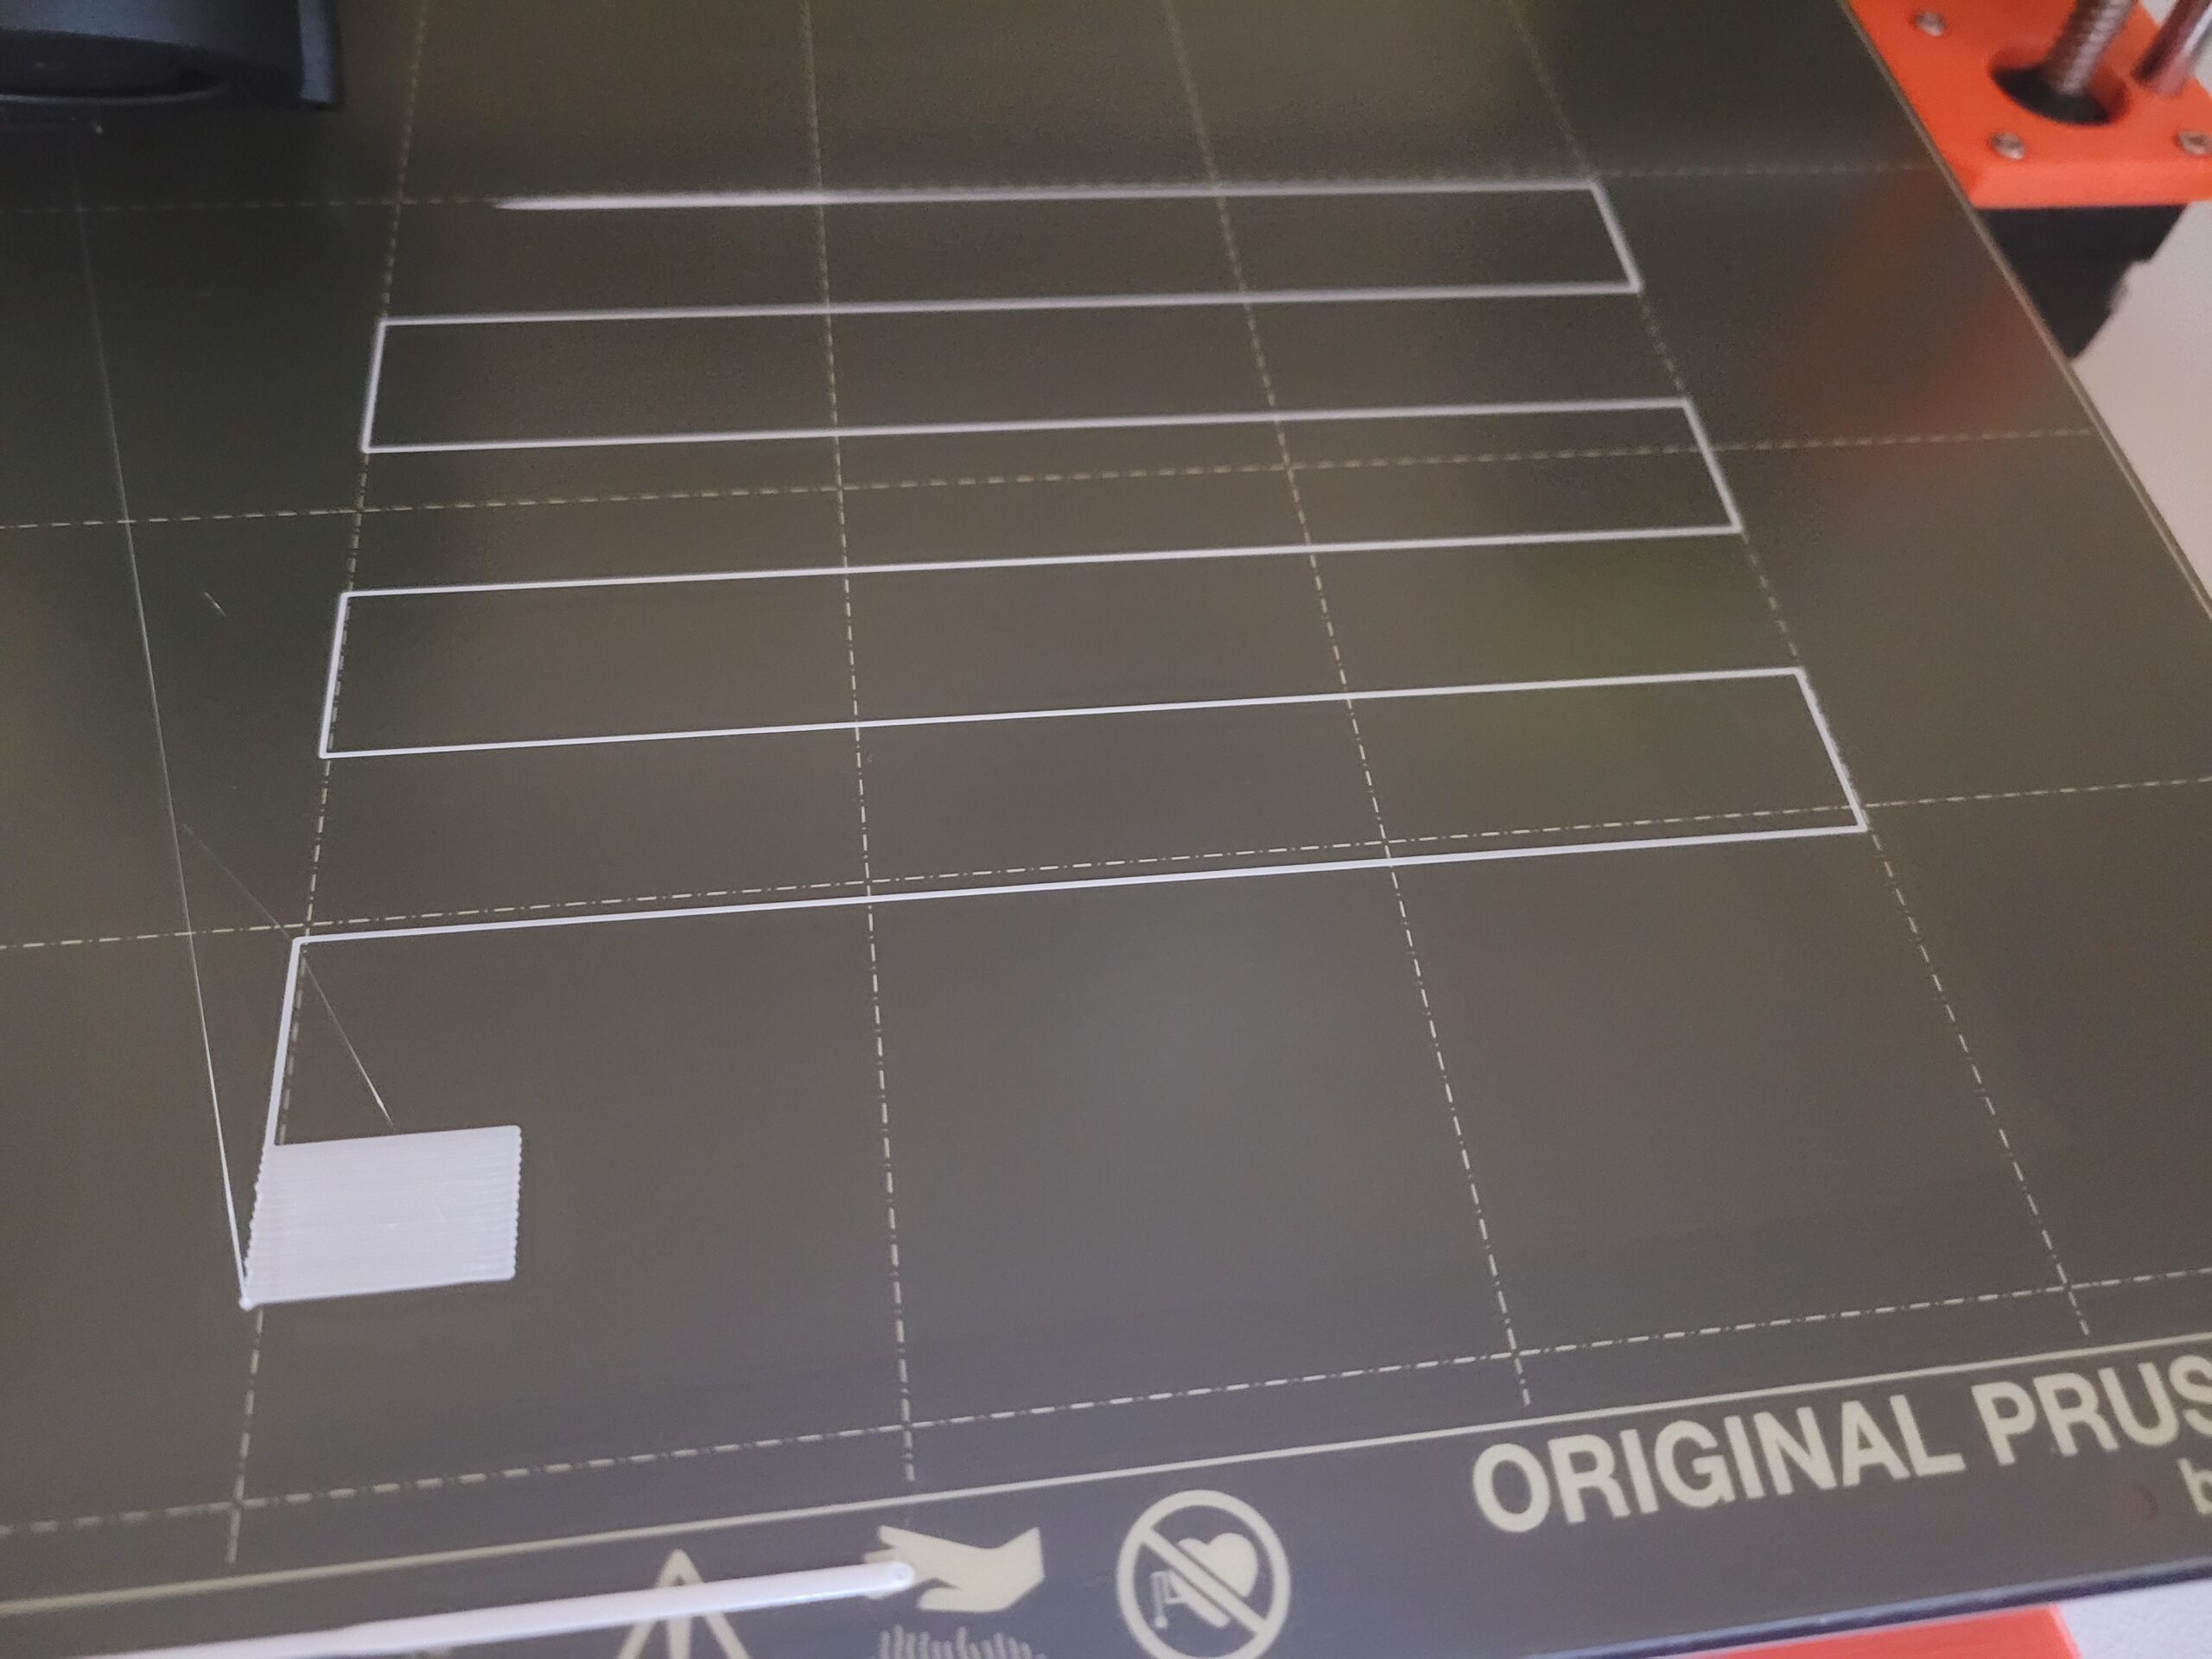 First layer lines spacing · Issue #9054 · prusa3d/PrusaSlicer · GitHub